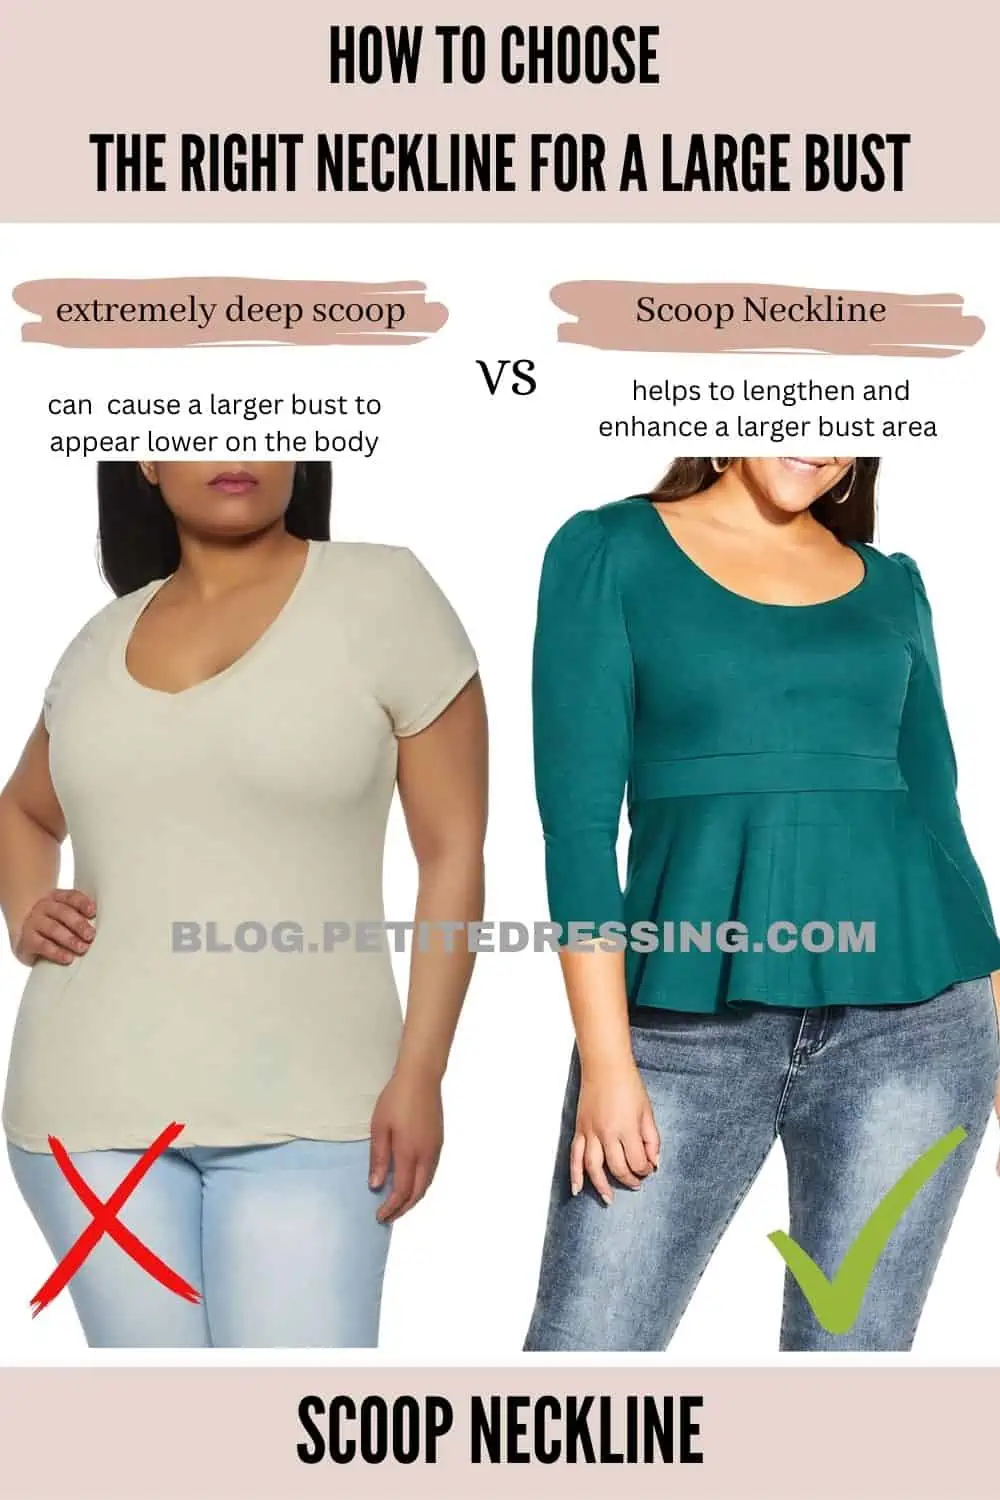 I have big boobs & I tried 5 tanks tops - there's certain neckline bigger  chested ladies should wear, perfect for dates